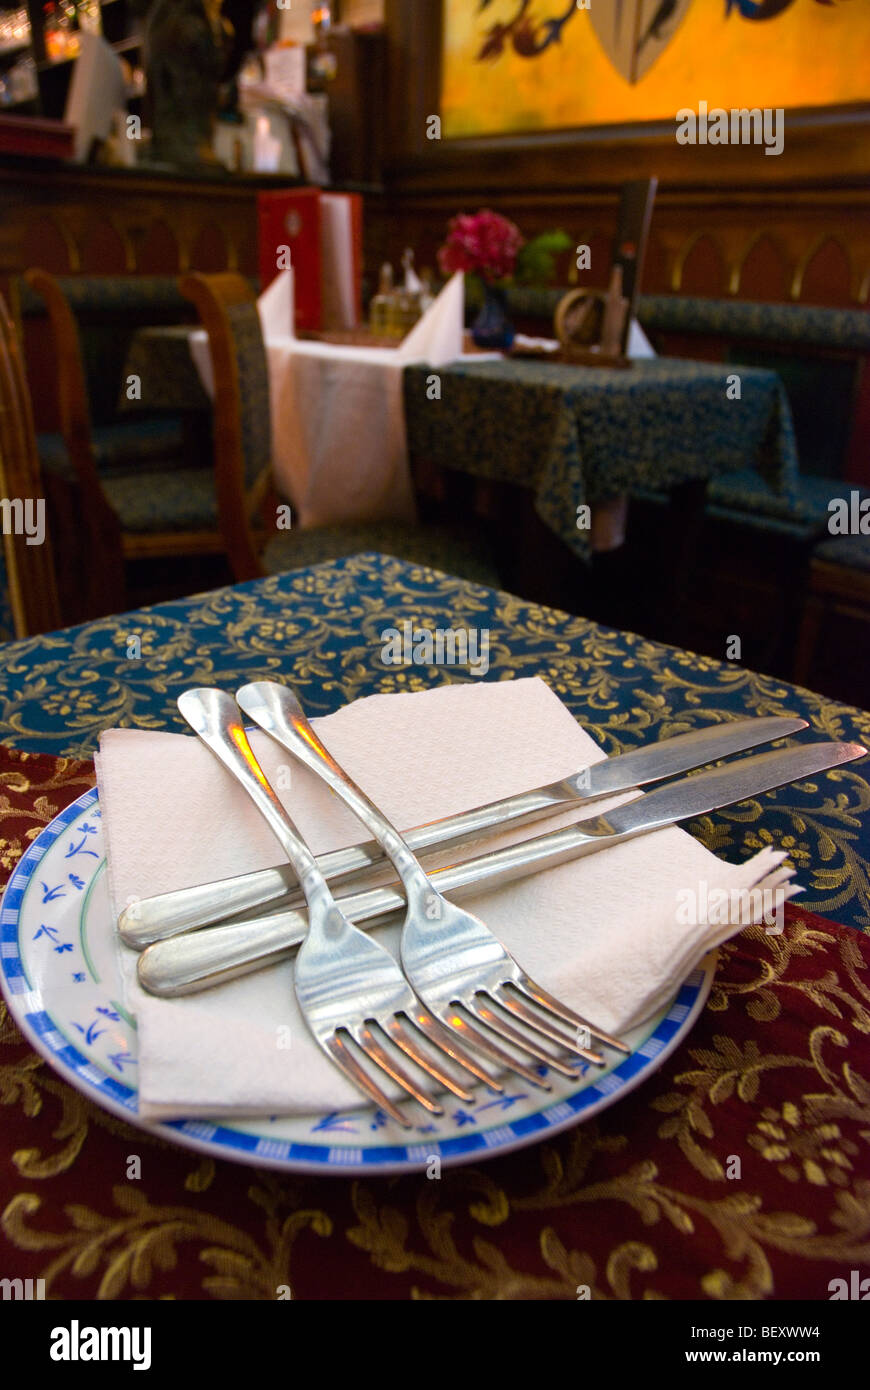 Forks and knives set the Central European way in a restaurant Sopron Hungary Europe Stock Photo